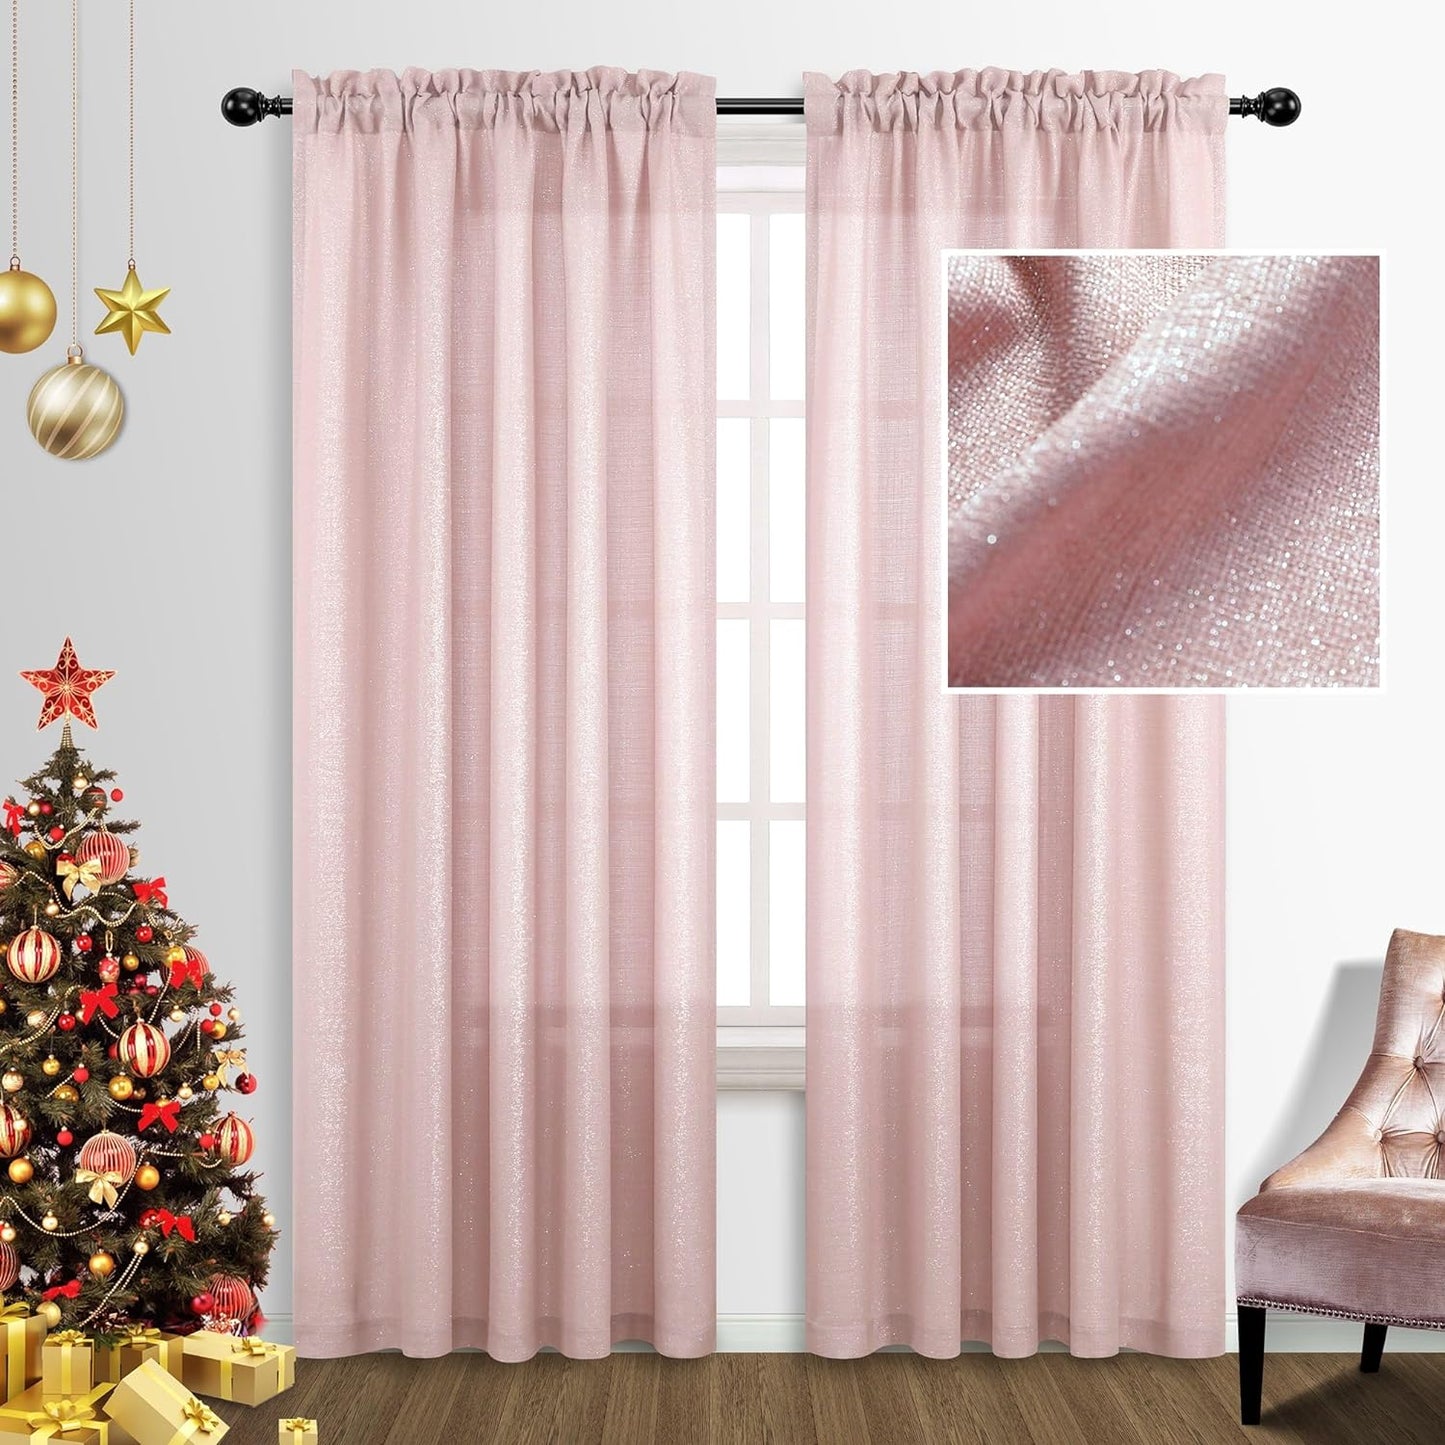 Gold Curtains 84 Inch Length for Living Room 2 Panels Set Rod Pocket Window Decor Semi Sheer Luxury Sparkle Shimmer Shiny Glitter Brown Golden Mustard Curtains for Bedroom 52X84 Long Christmas Decor  MRS.NATURALL TEXTILE Pink 52X84 